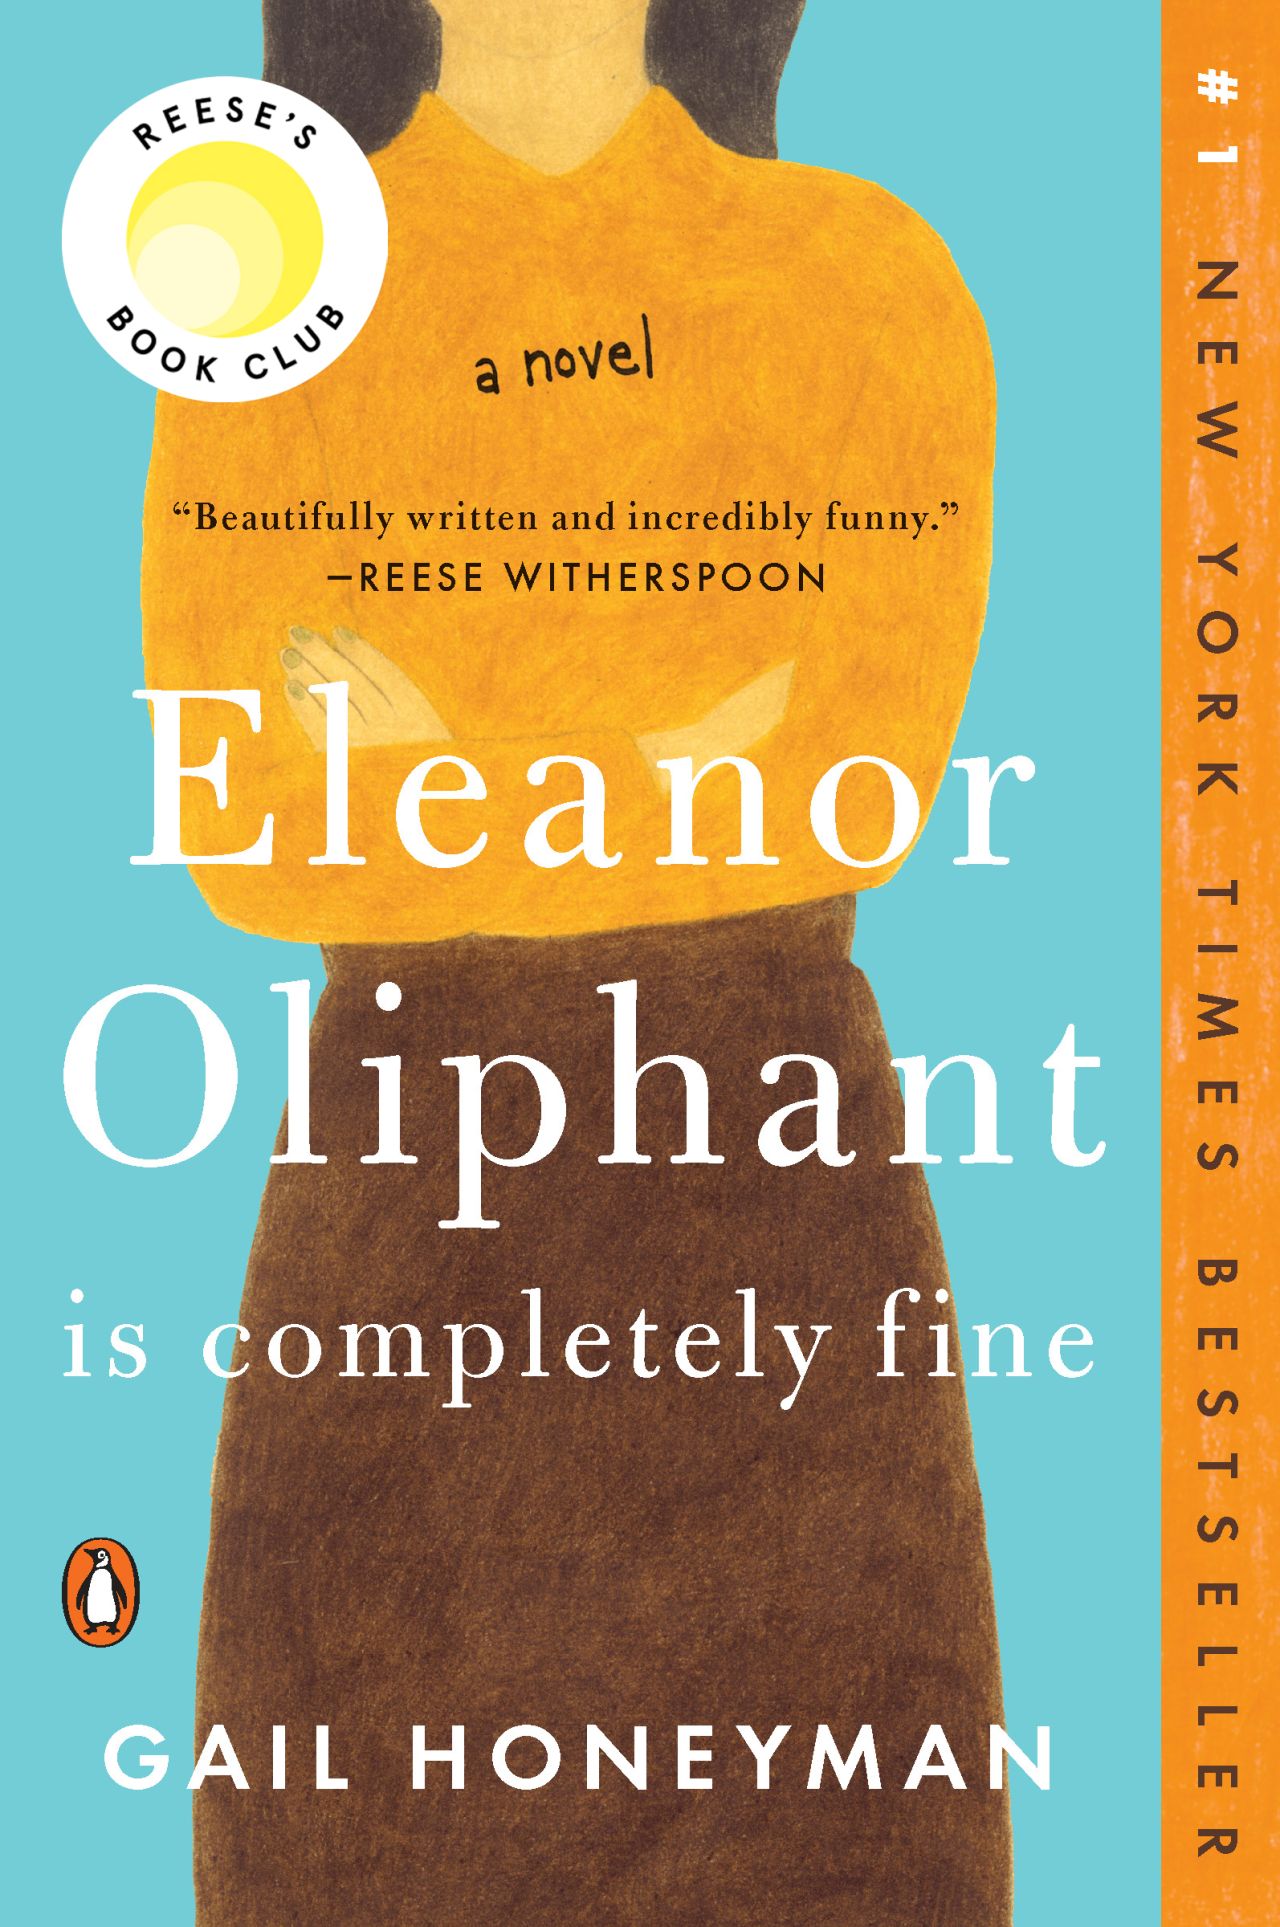 reese witherspoon book club Eleanor Oliphant is Completely Fine